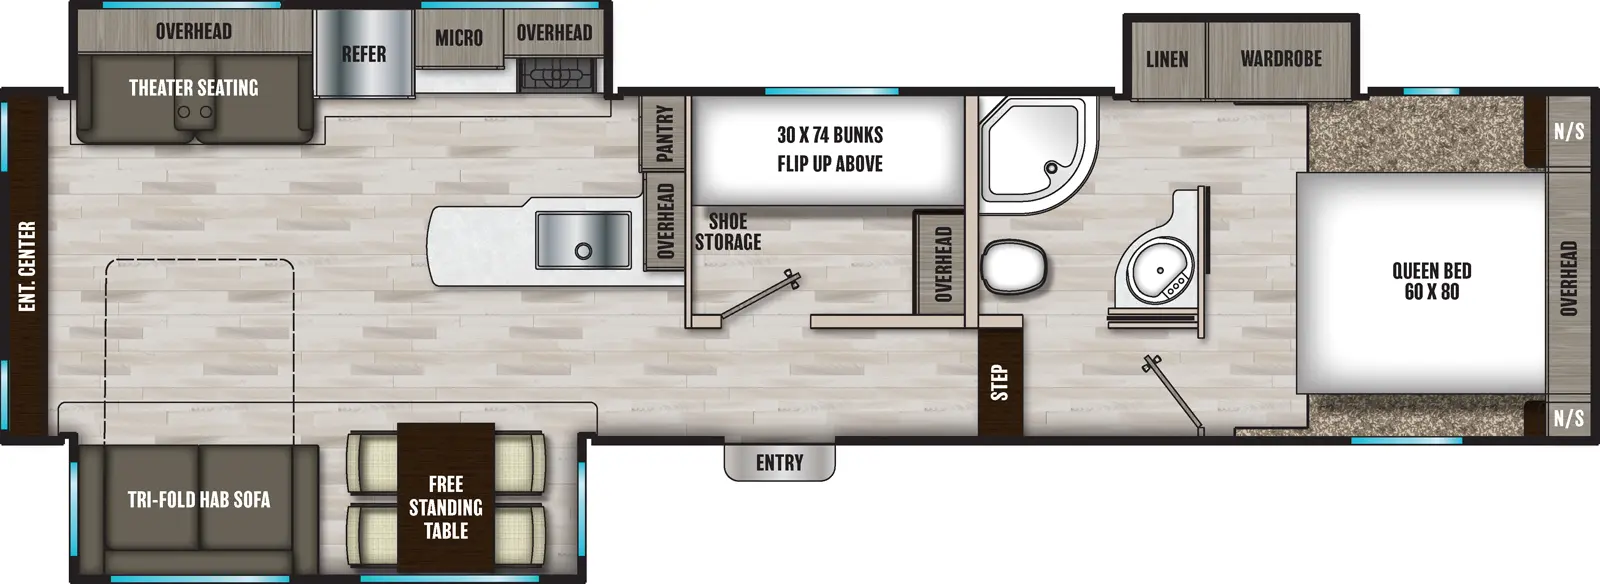 The 30BHS has three slide outs and one entry. Interior layout front to back: front bedroom with a foot facing queen bed, overhead cabinet, night stands on each side, and off-door side slideout with wardrobe and linen cabinet; off-door side full pass-through bathroom; step down to the off-door side bunk room with overhead storage, shoe storage, and bunks with top bunk flip-up; entry door across from bunk room; off-door side peninsula kitchen counter that wraps from the middle of the unit to the inner wall with overhead cabinet and pantry; off-door side slideout with overhead cabinet, microwave, refrigerator, and theater seating with overhead cabinet; door side slideout with free-standing table and tri-fold hide-a-bed sofa; rear entertainment center.